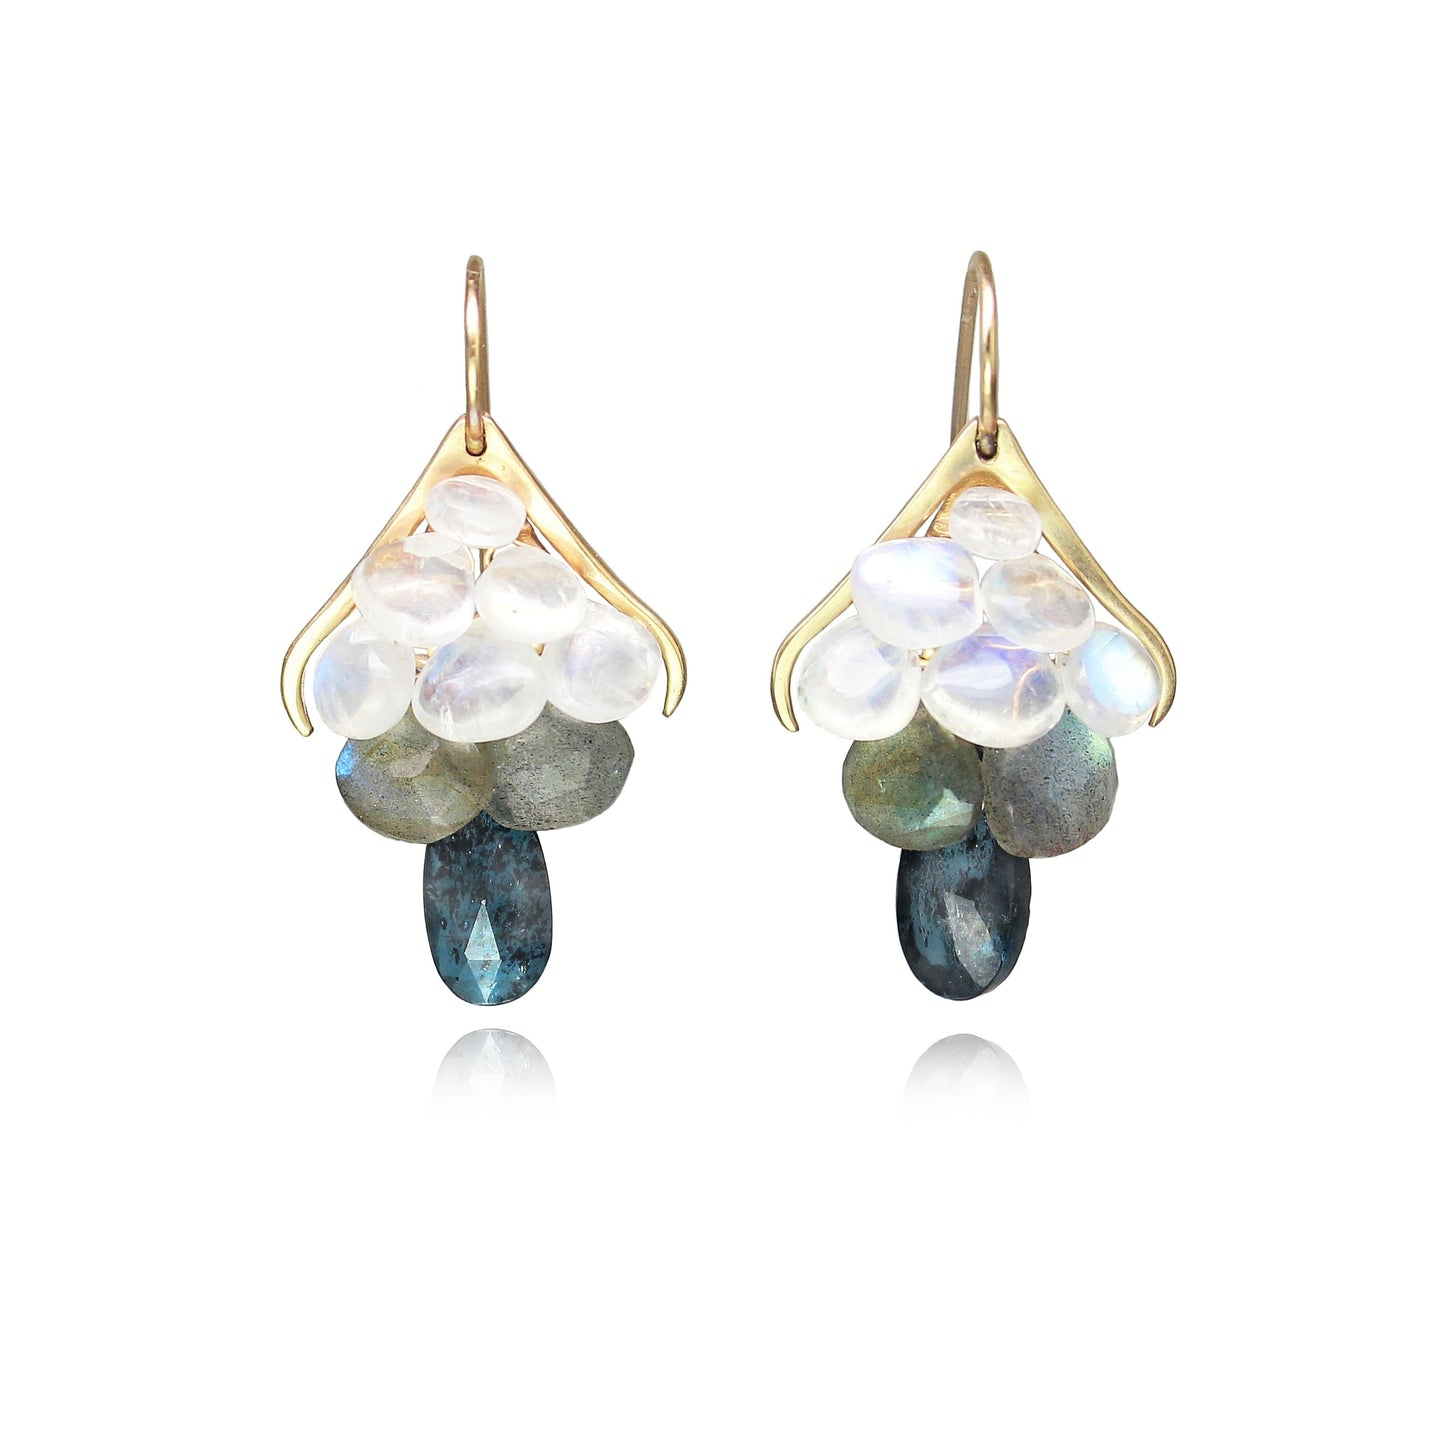 Small Plumage Earrings featuring handpicked ombre gemstones, and elongated ear wires